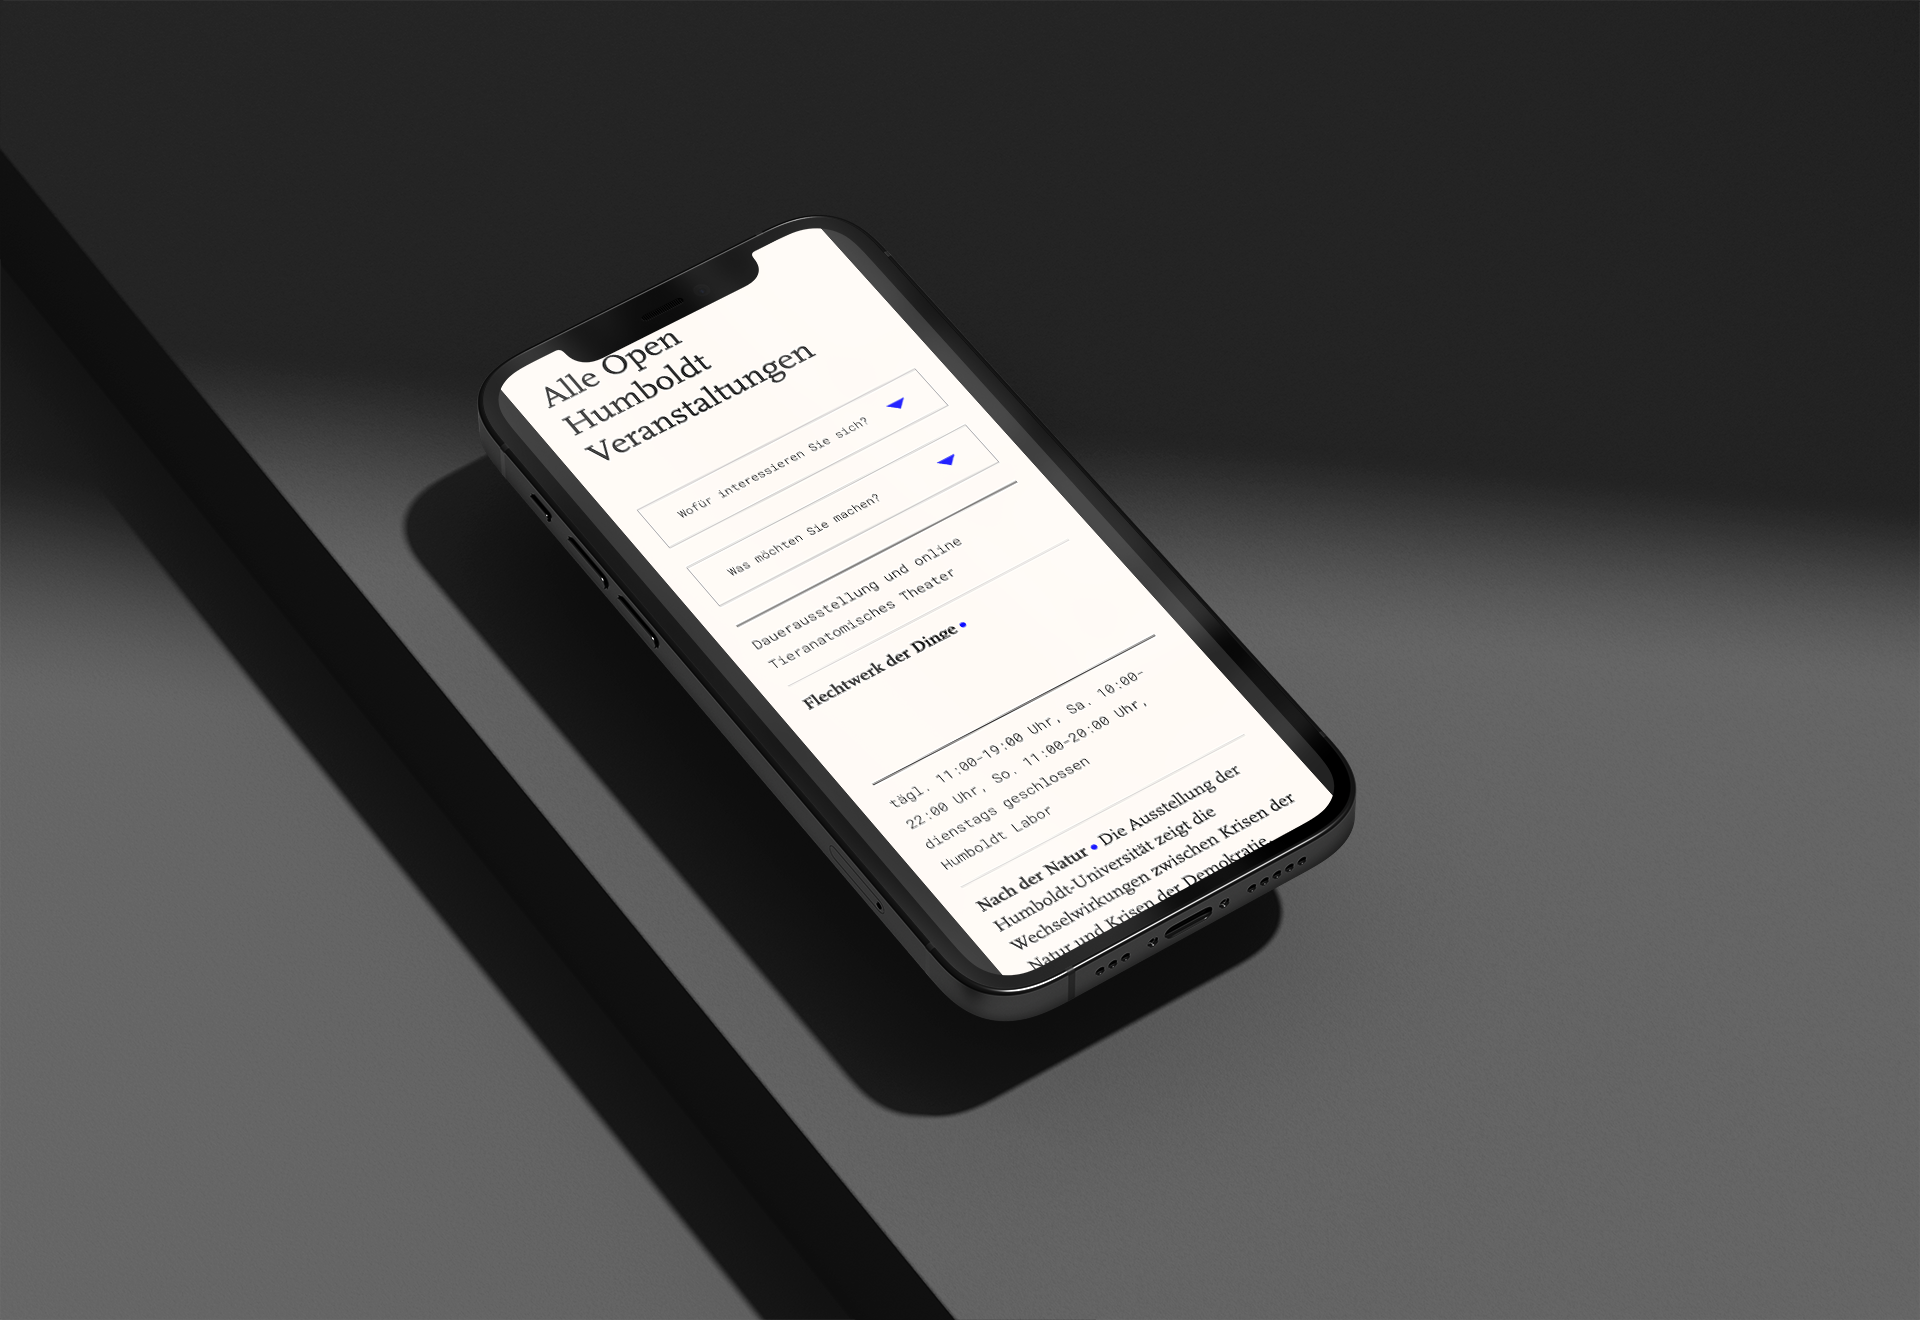 a mockup of a smartphone on cool black surface showing a page with an event list in clean simple design and grey tones.